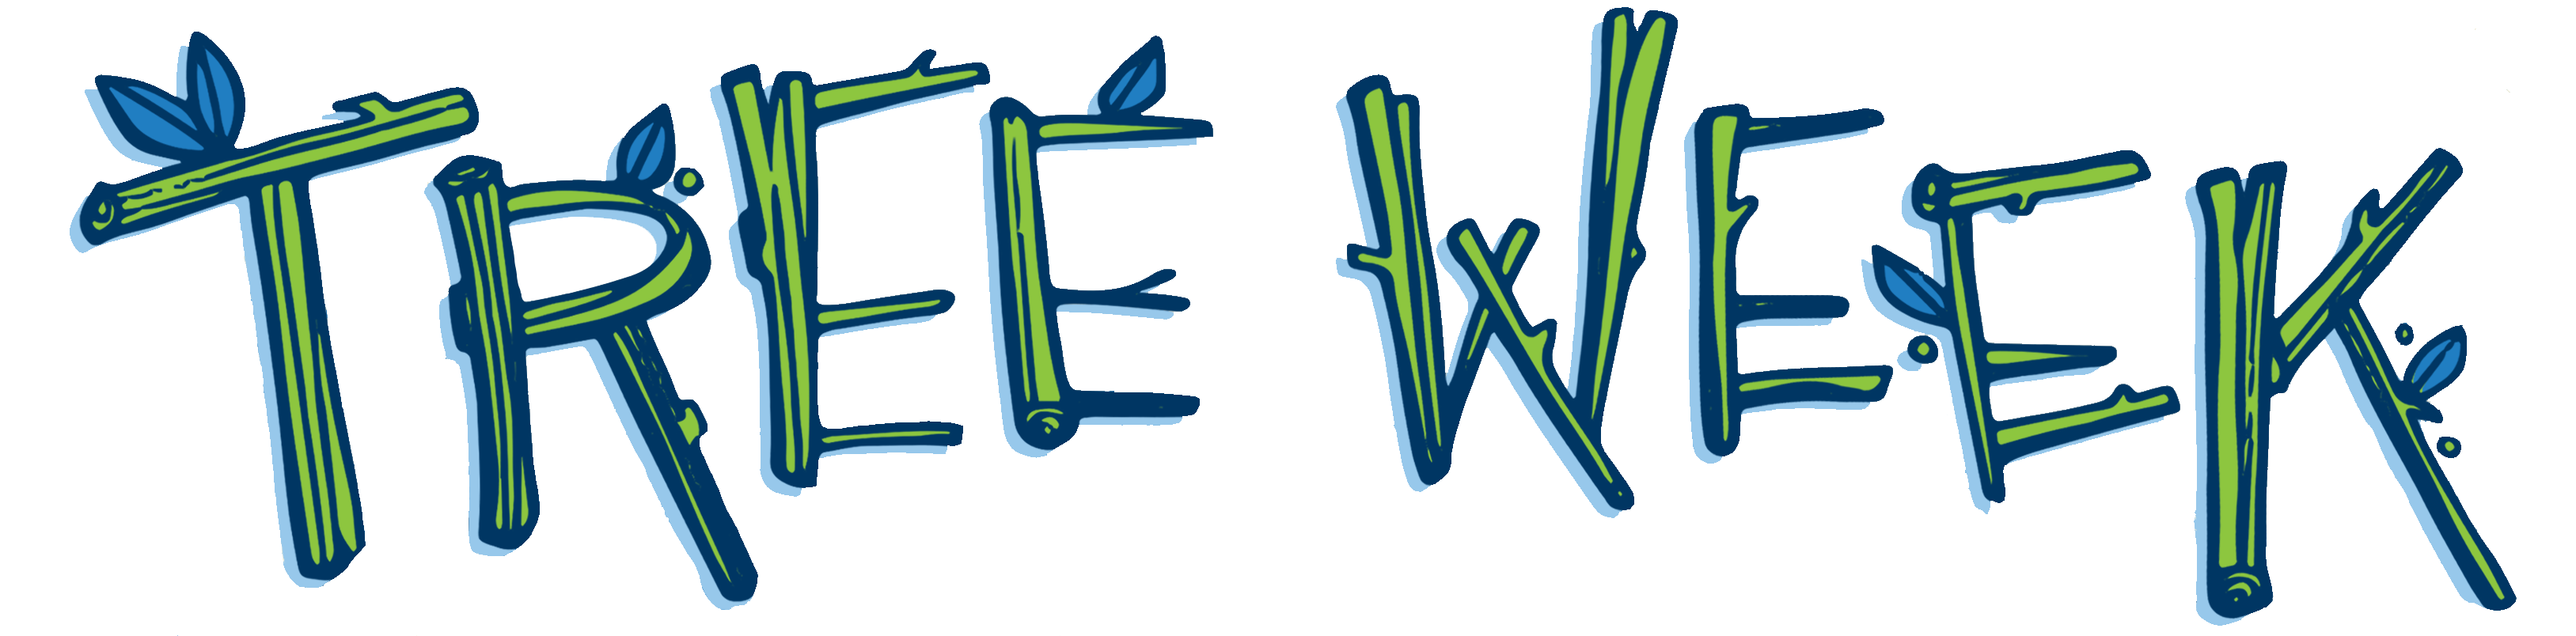 Tree Week green and blue graphic text logo with leaves